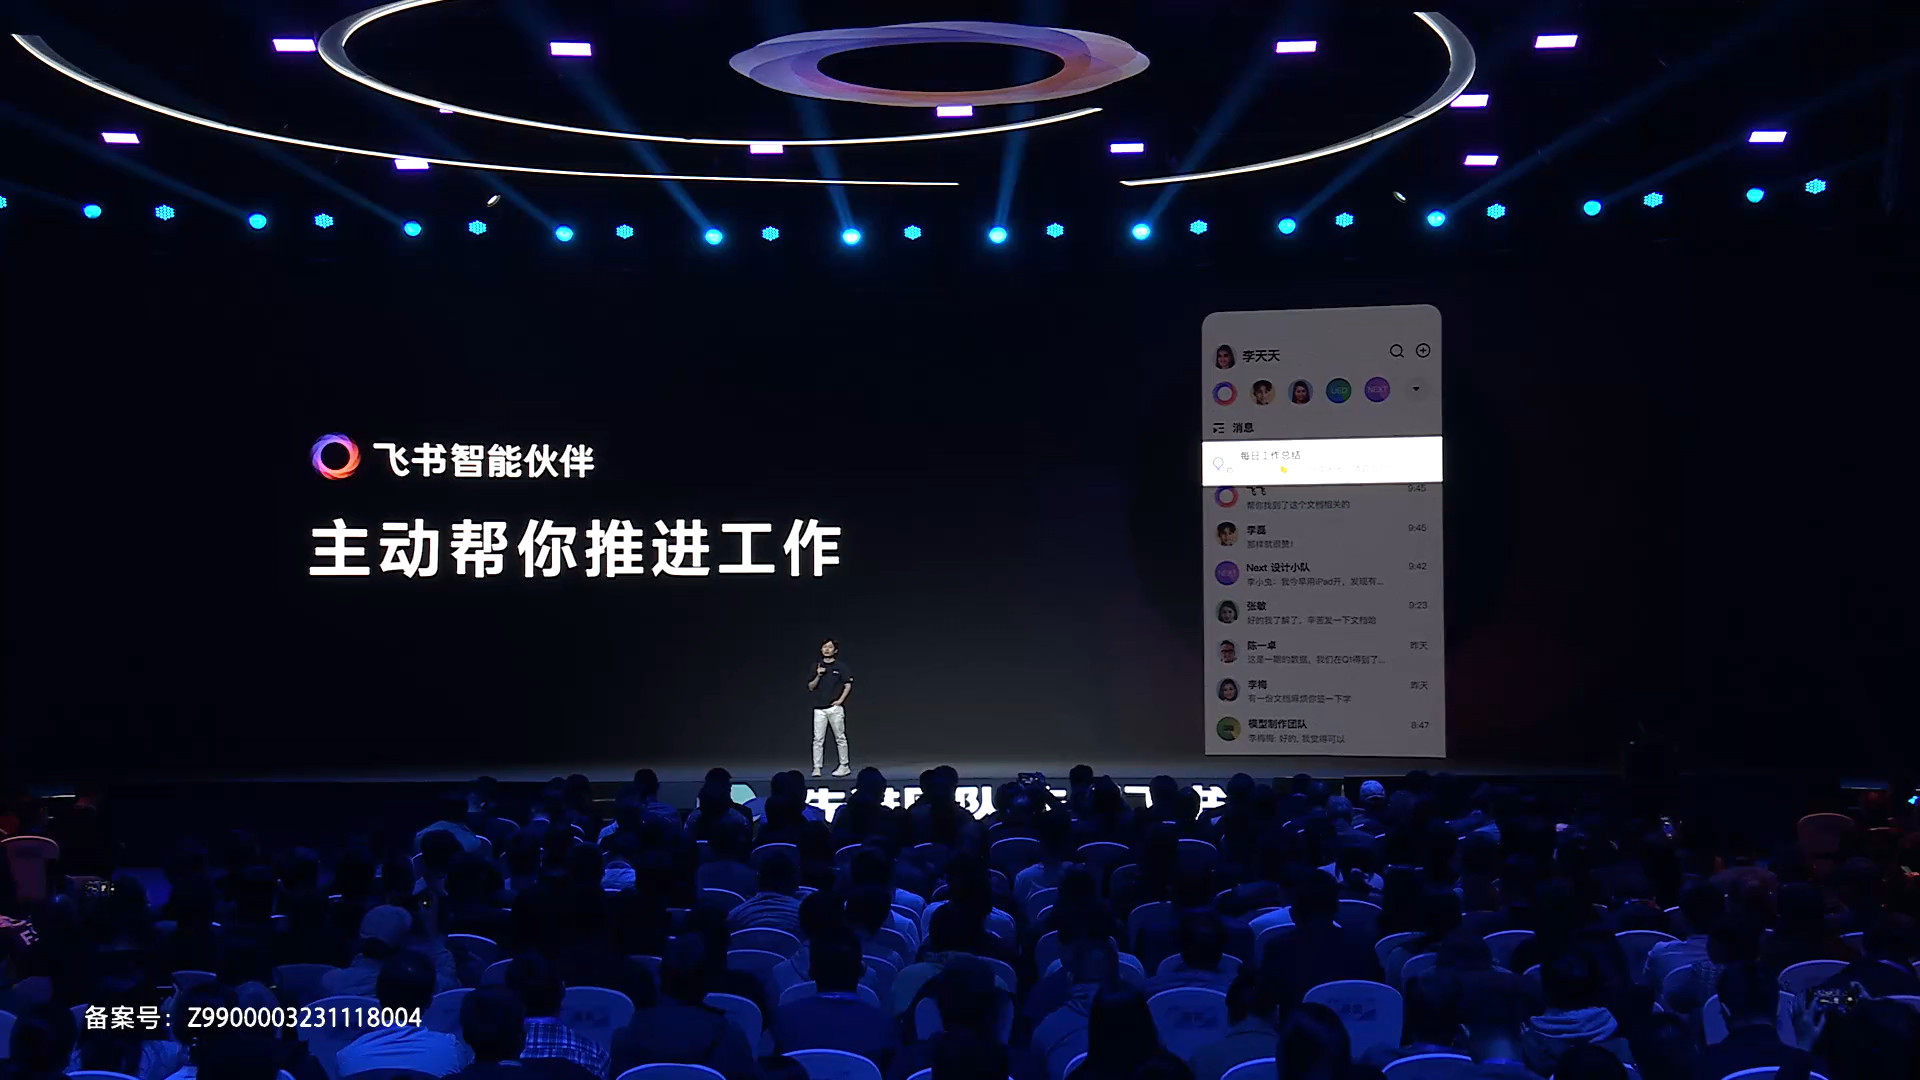 Feishu announces the latest version of its office tool, Feishu 7, with an AI-powered virtual assistant in Beijing on November 22, 2023. Photo: Feishu/ByteDance